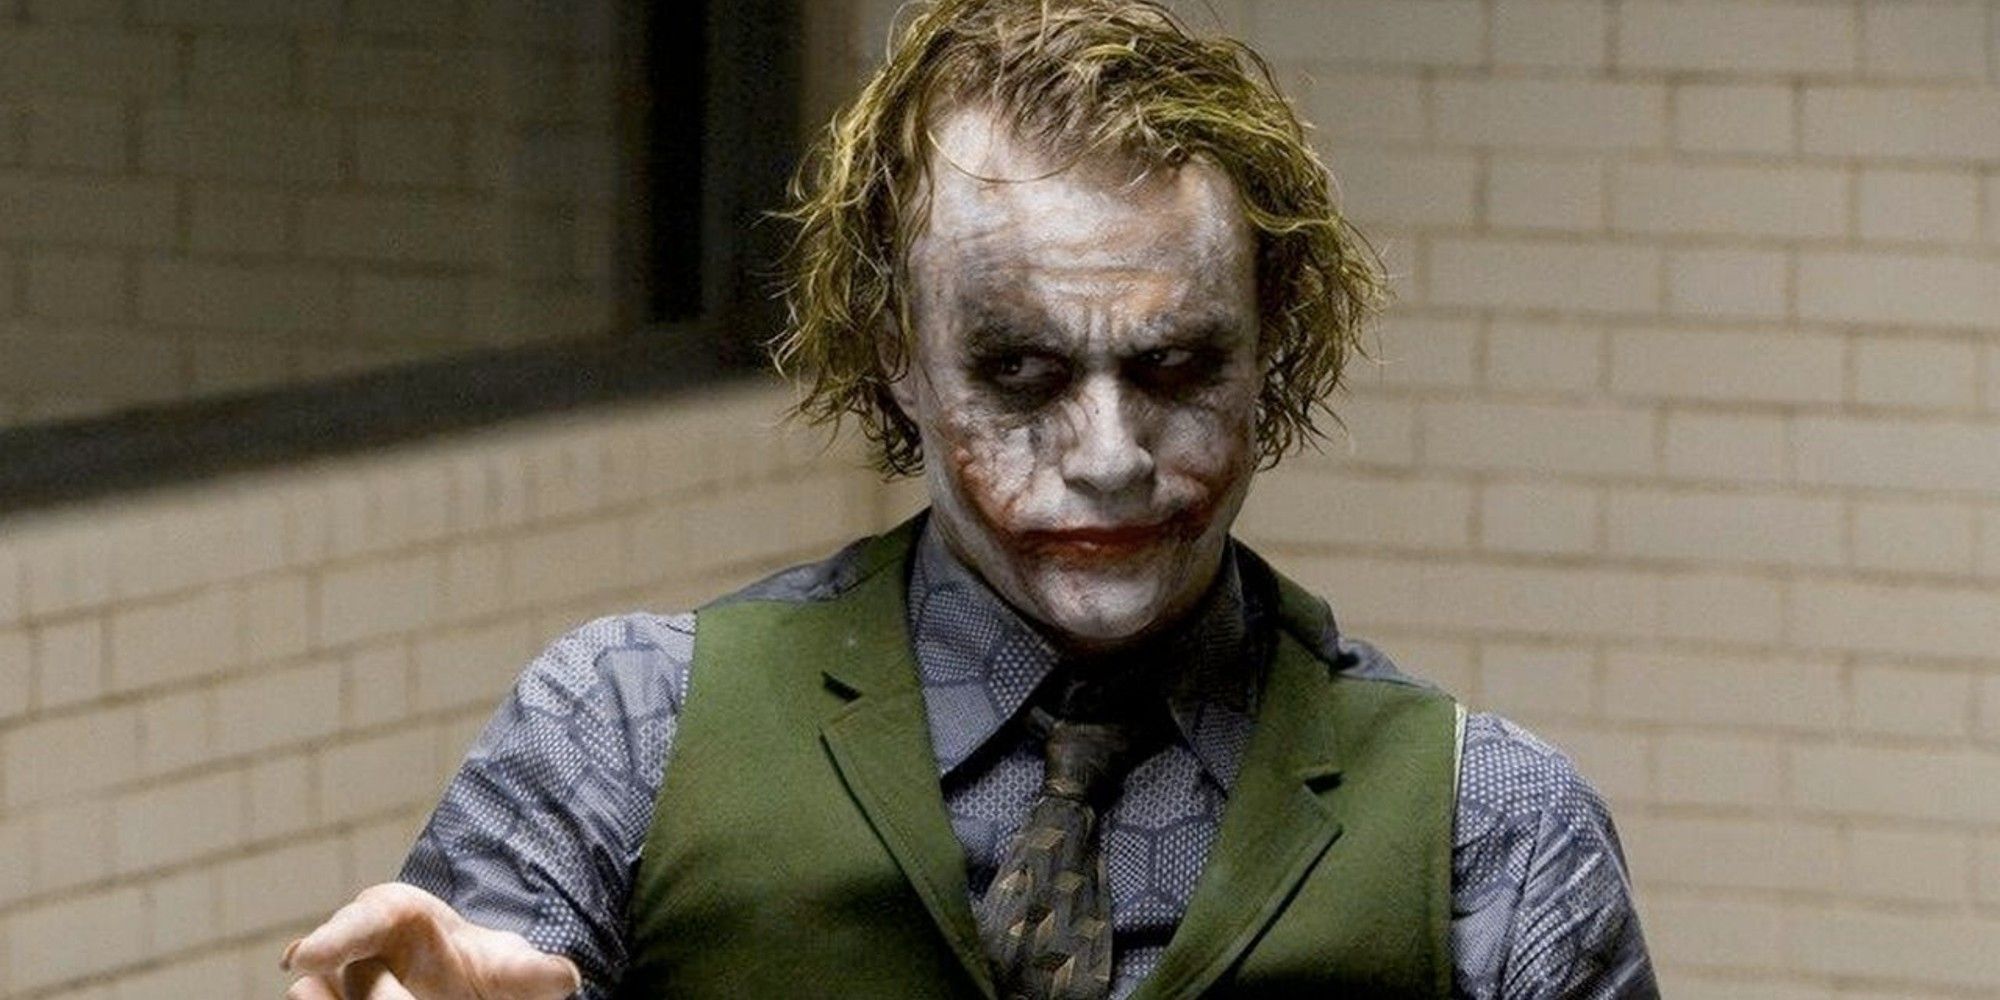 Joker sitting in an interrogation room pointing at someone off-camera in 'The Dark Knight'.